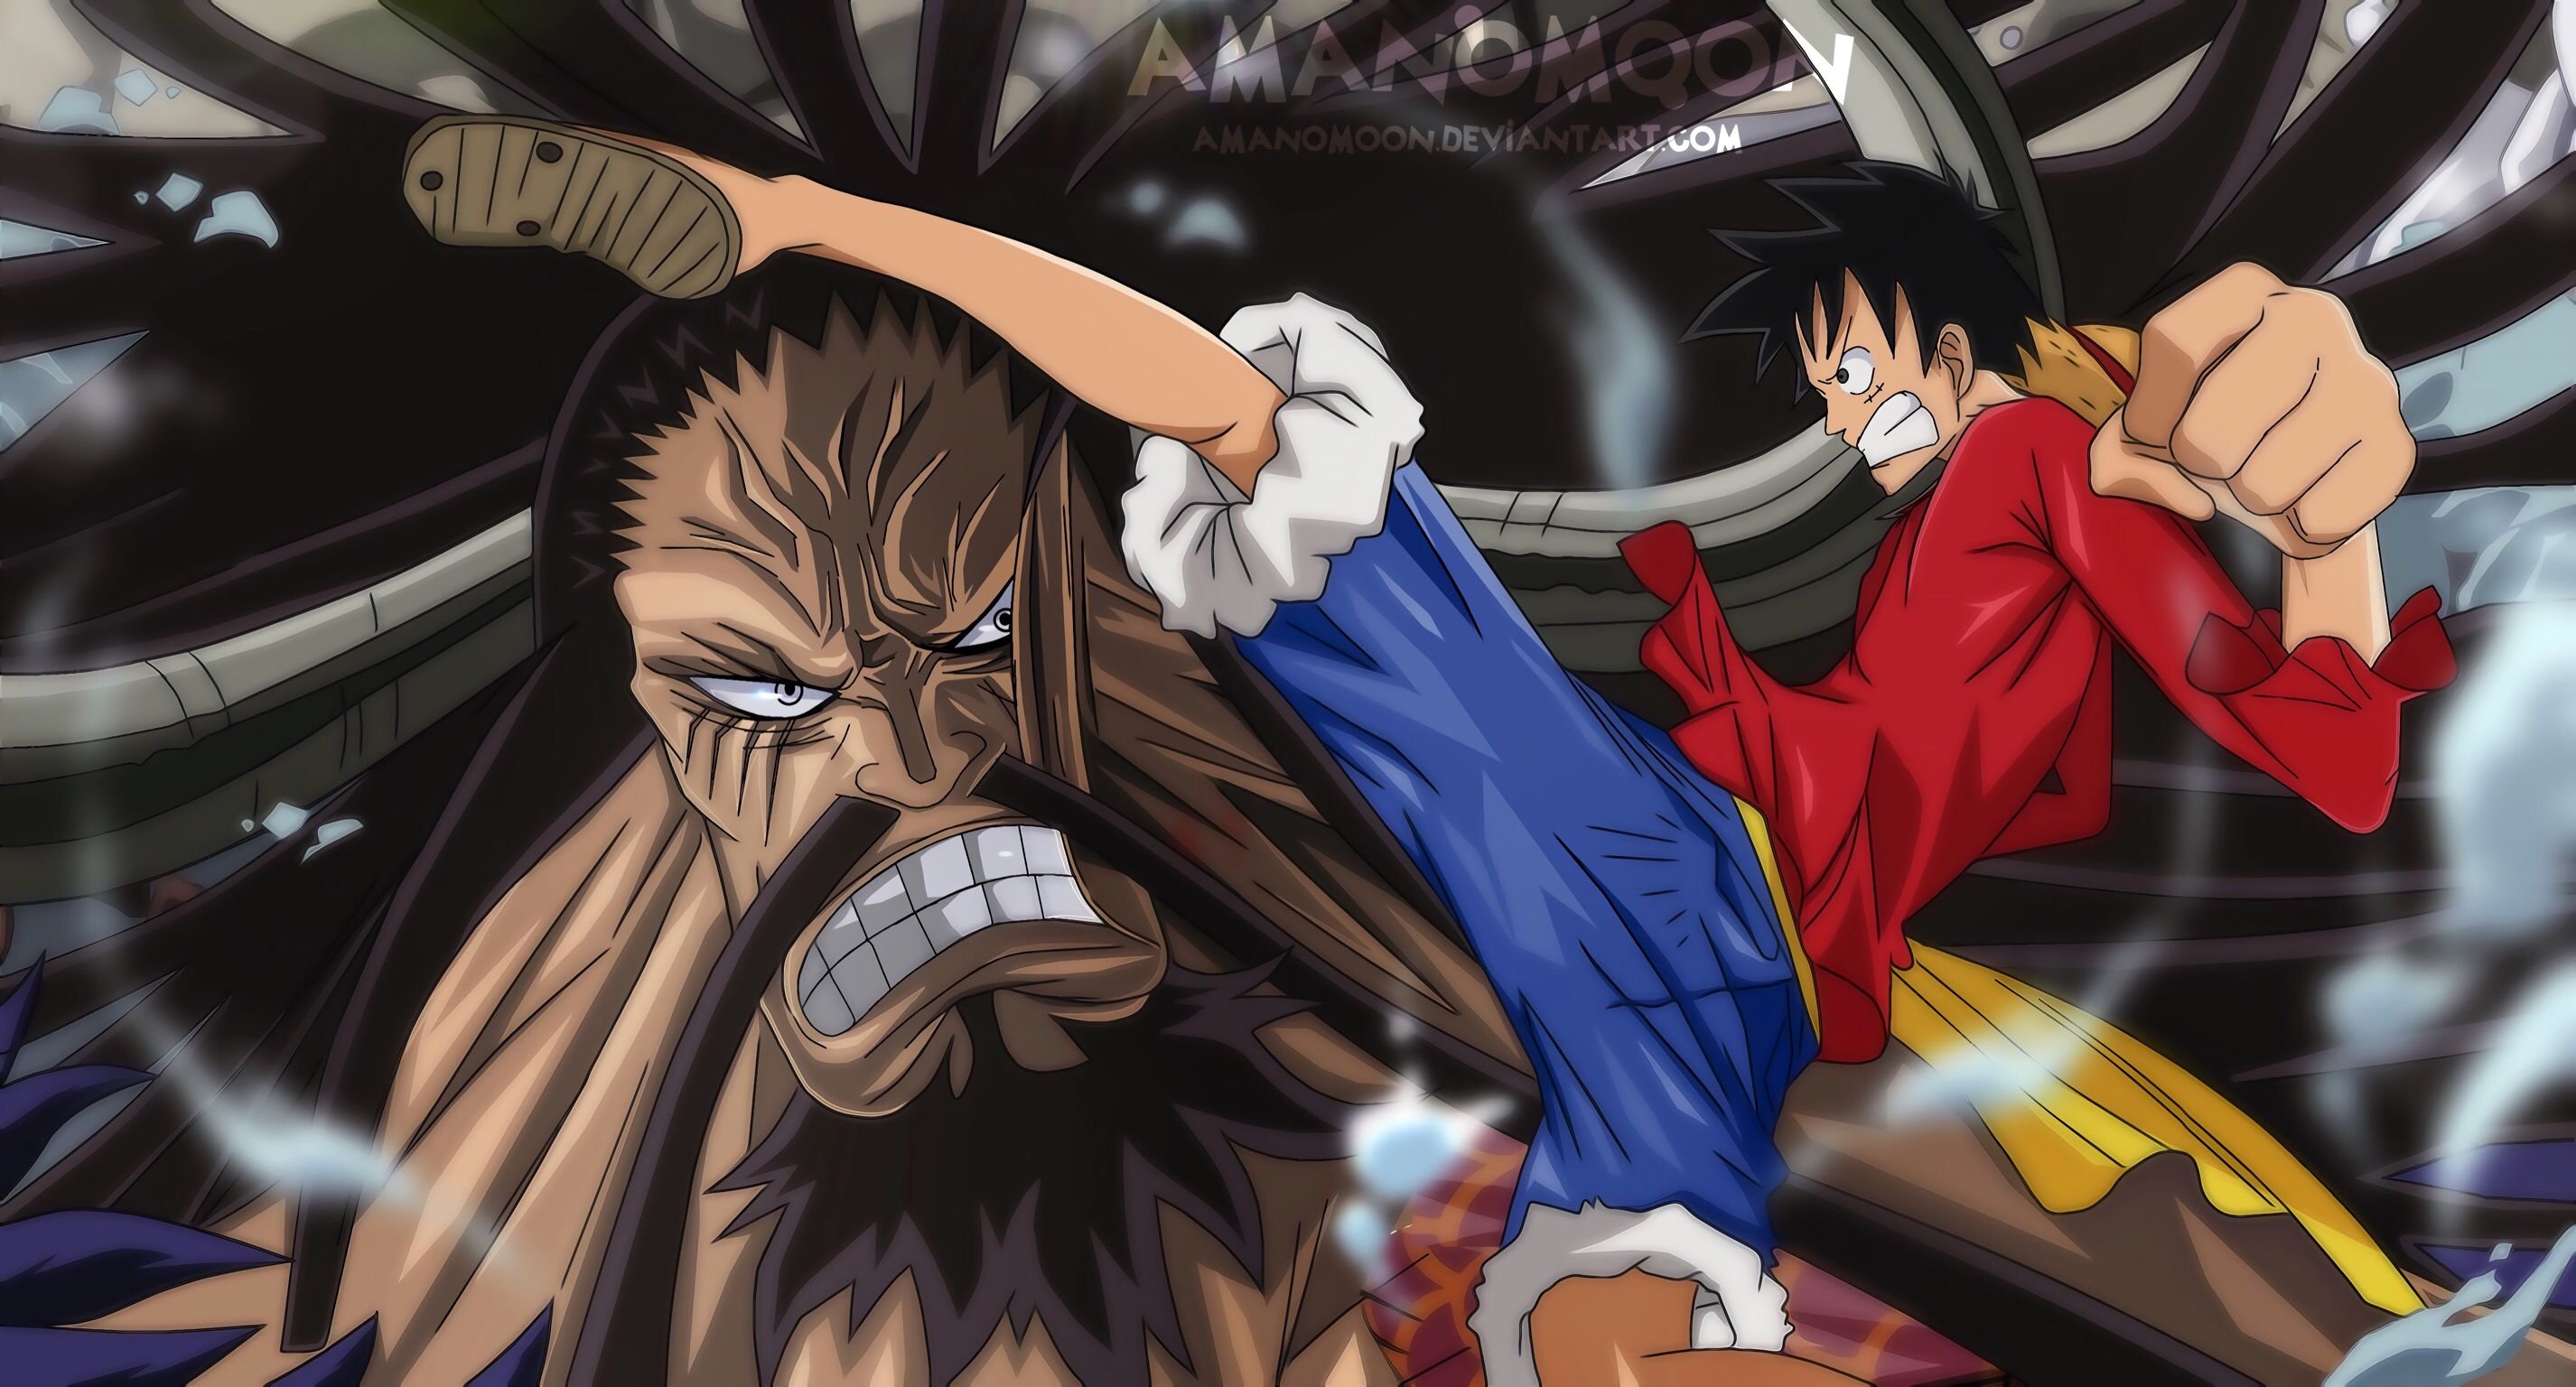 Monkey d luffy and dragon at night  one piece 4K wallpaper download